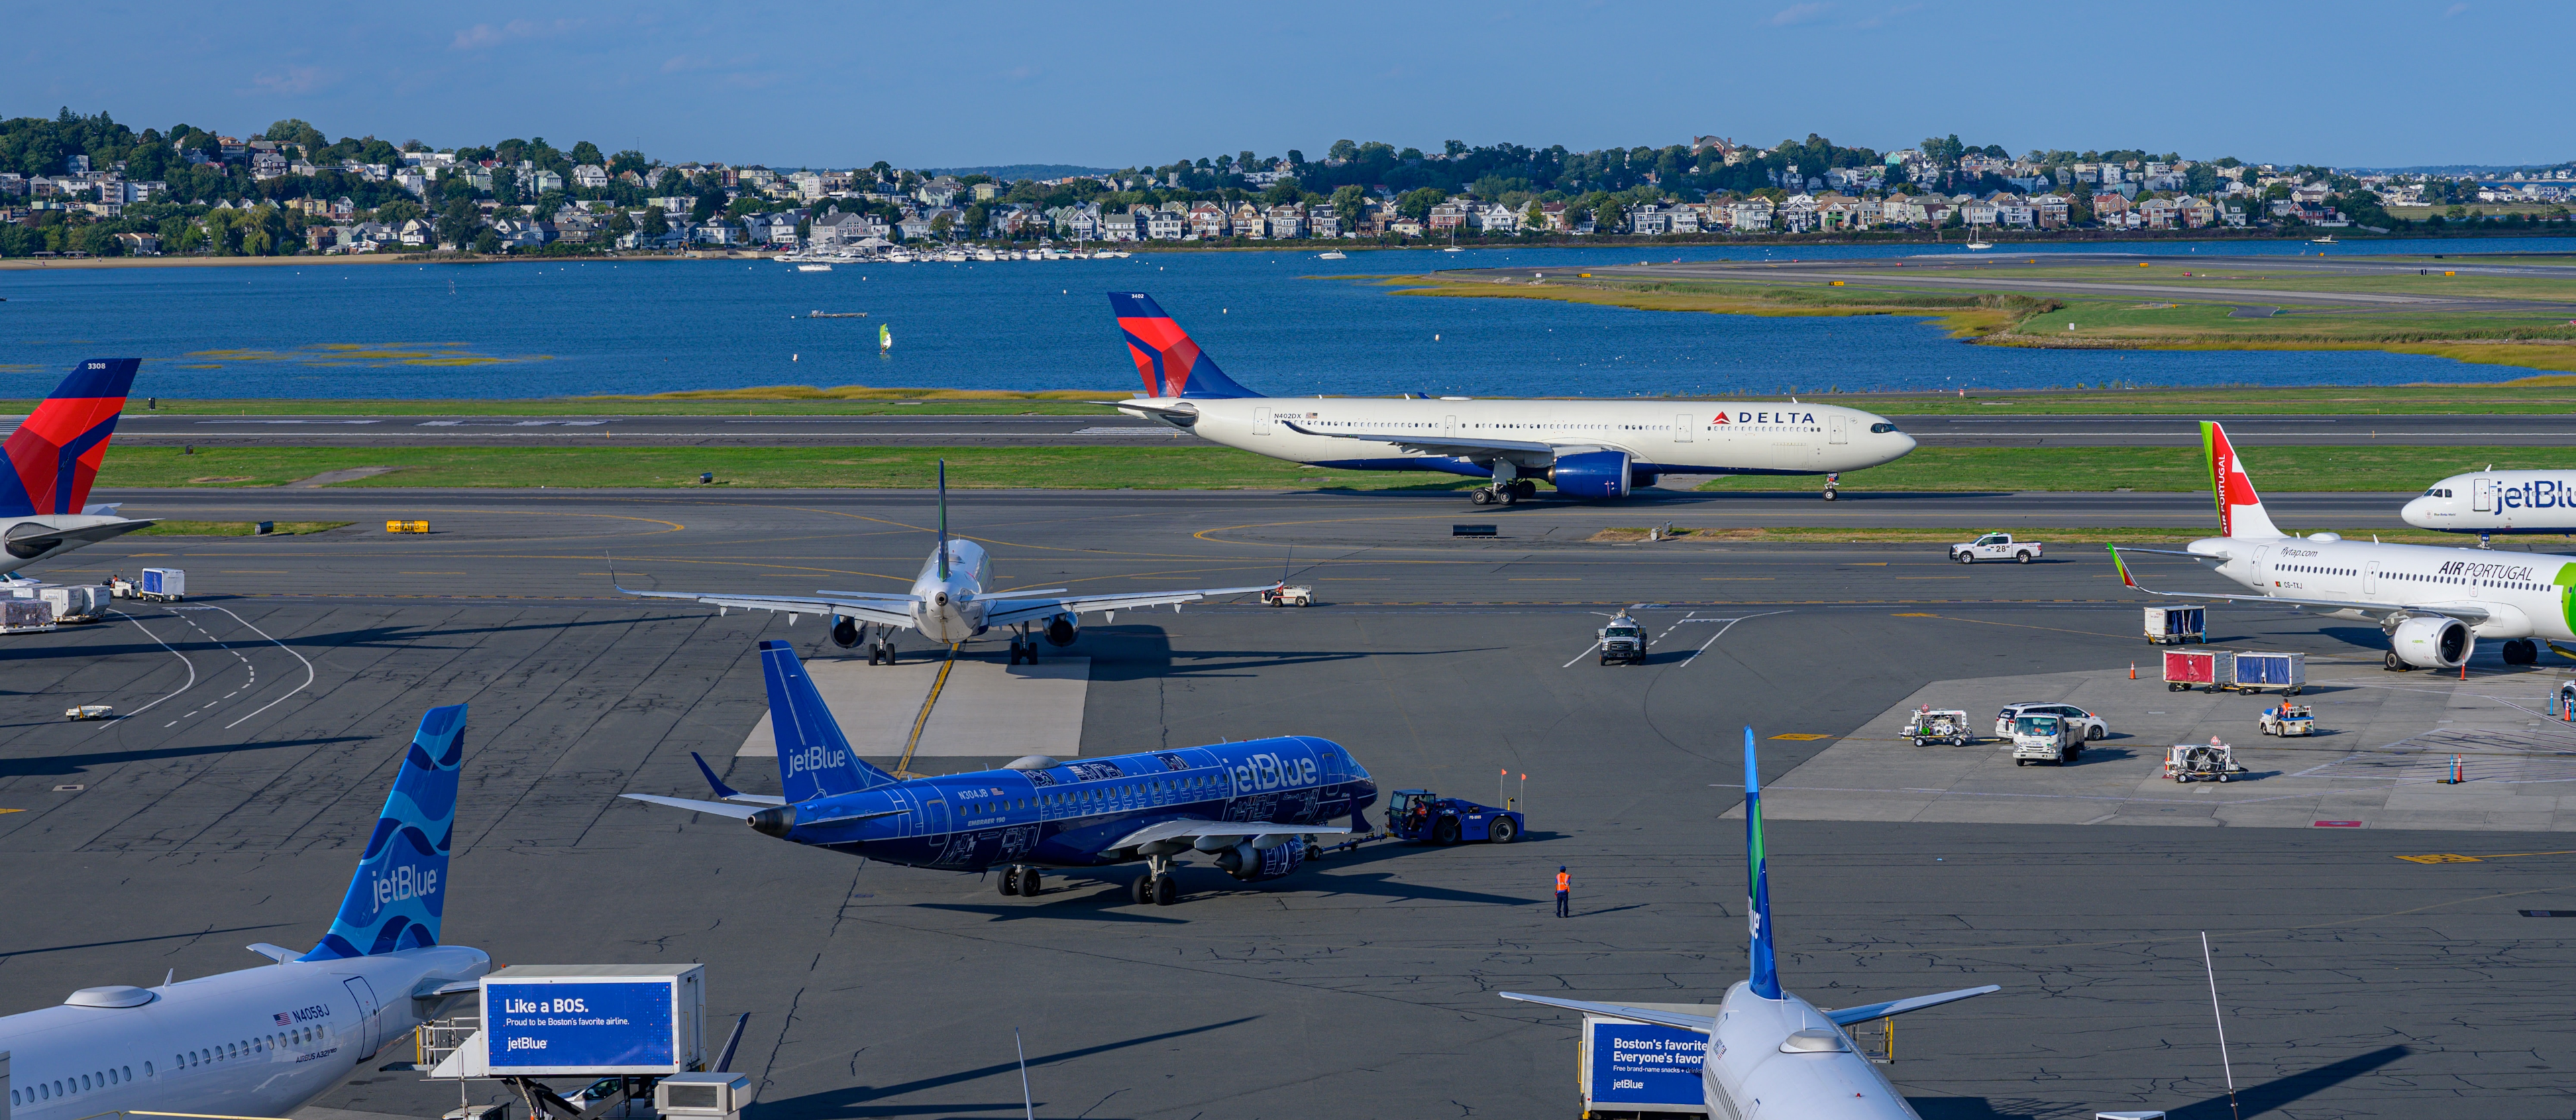 Logan Airport with a magnificent view of Boston